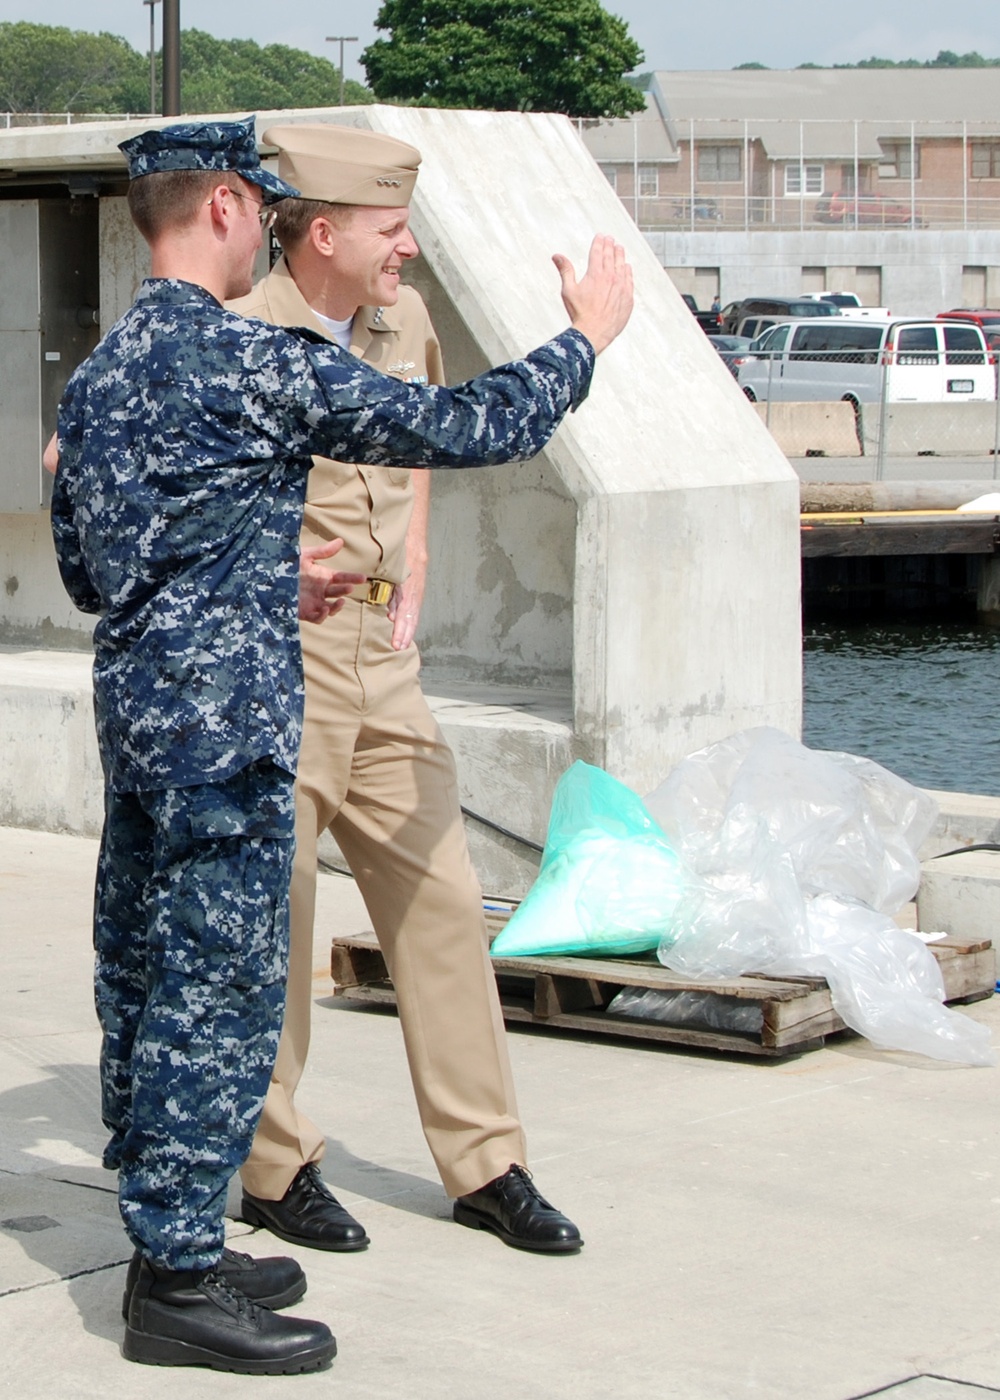 Vice Adm. Rogers tours USS New Mexico